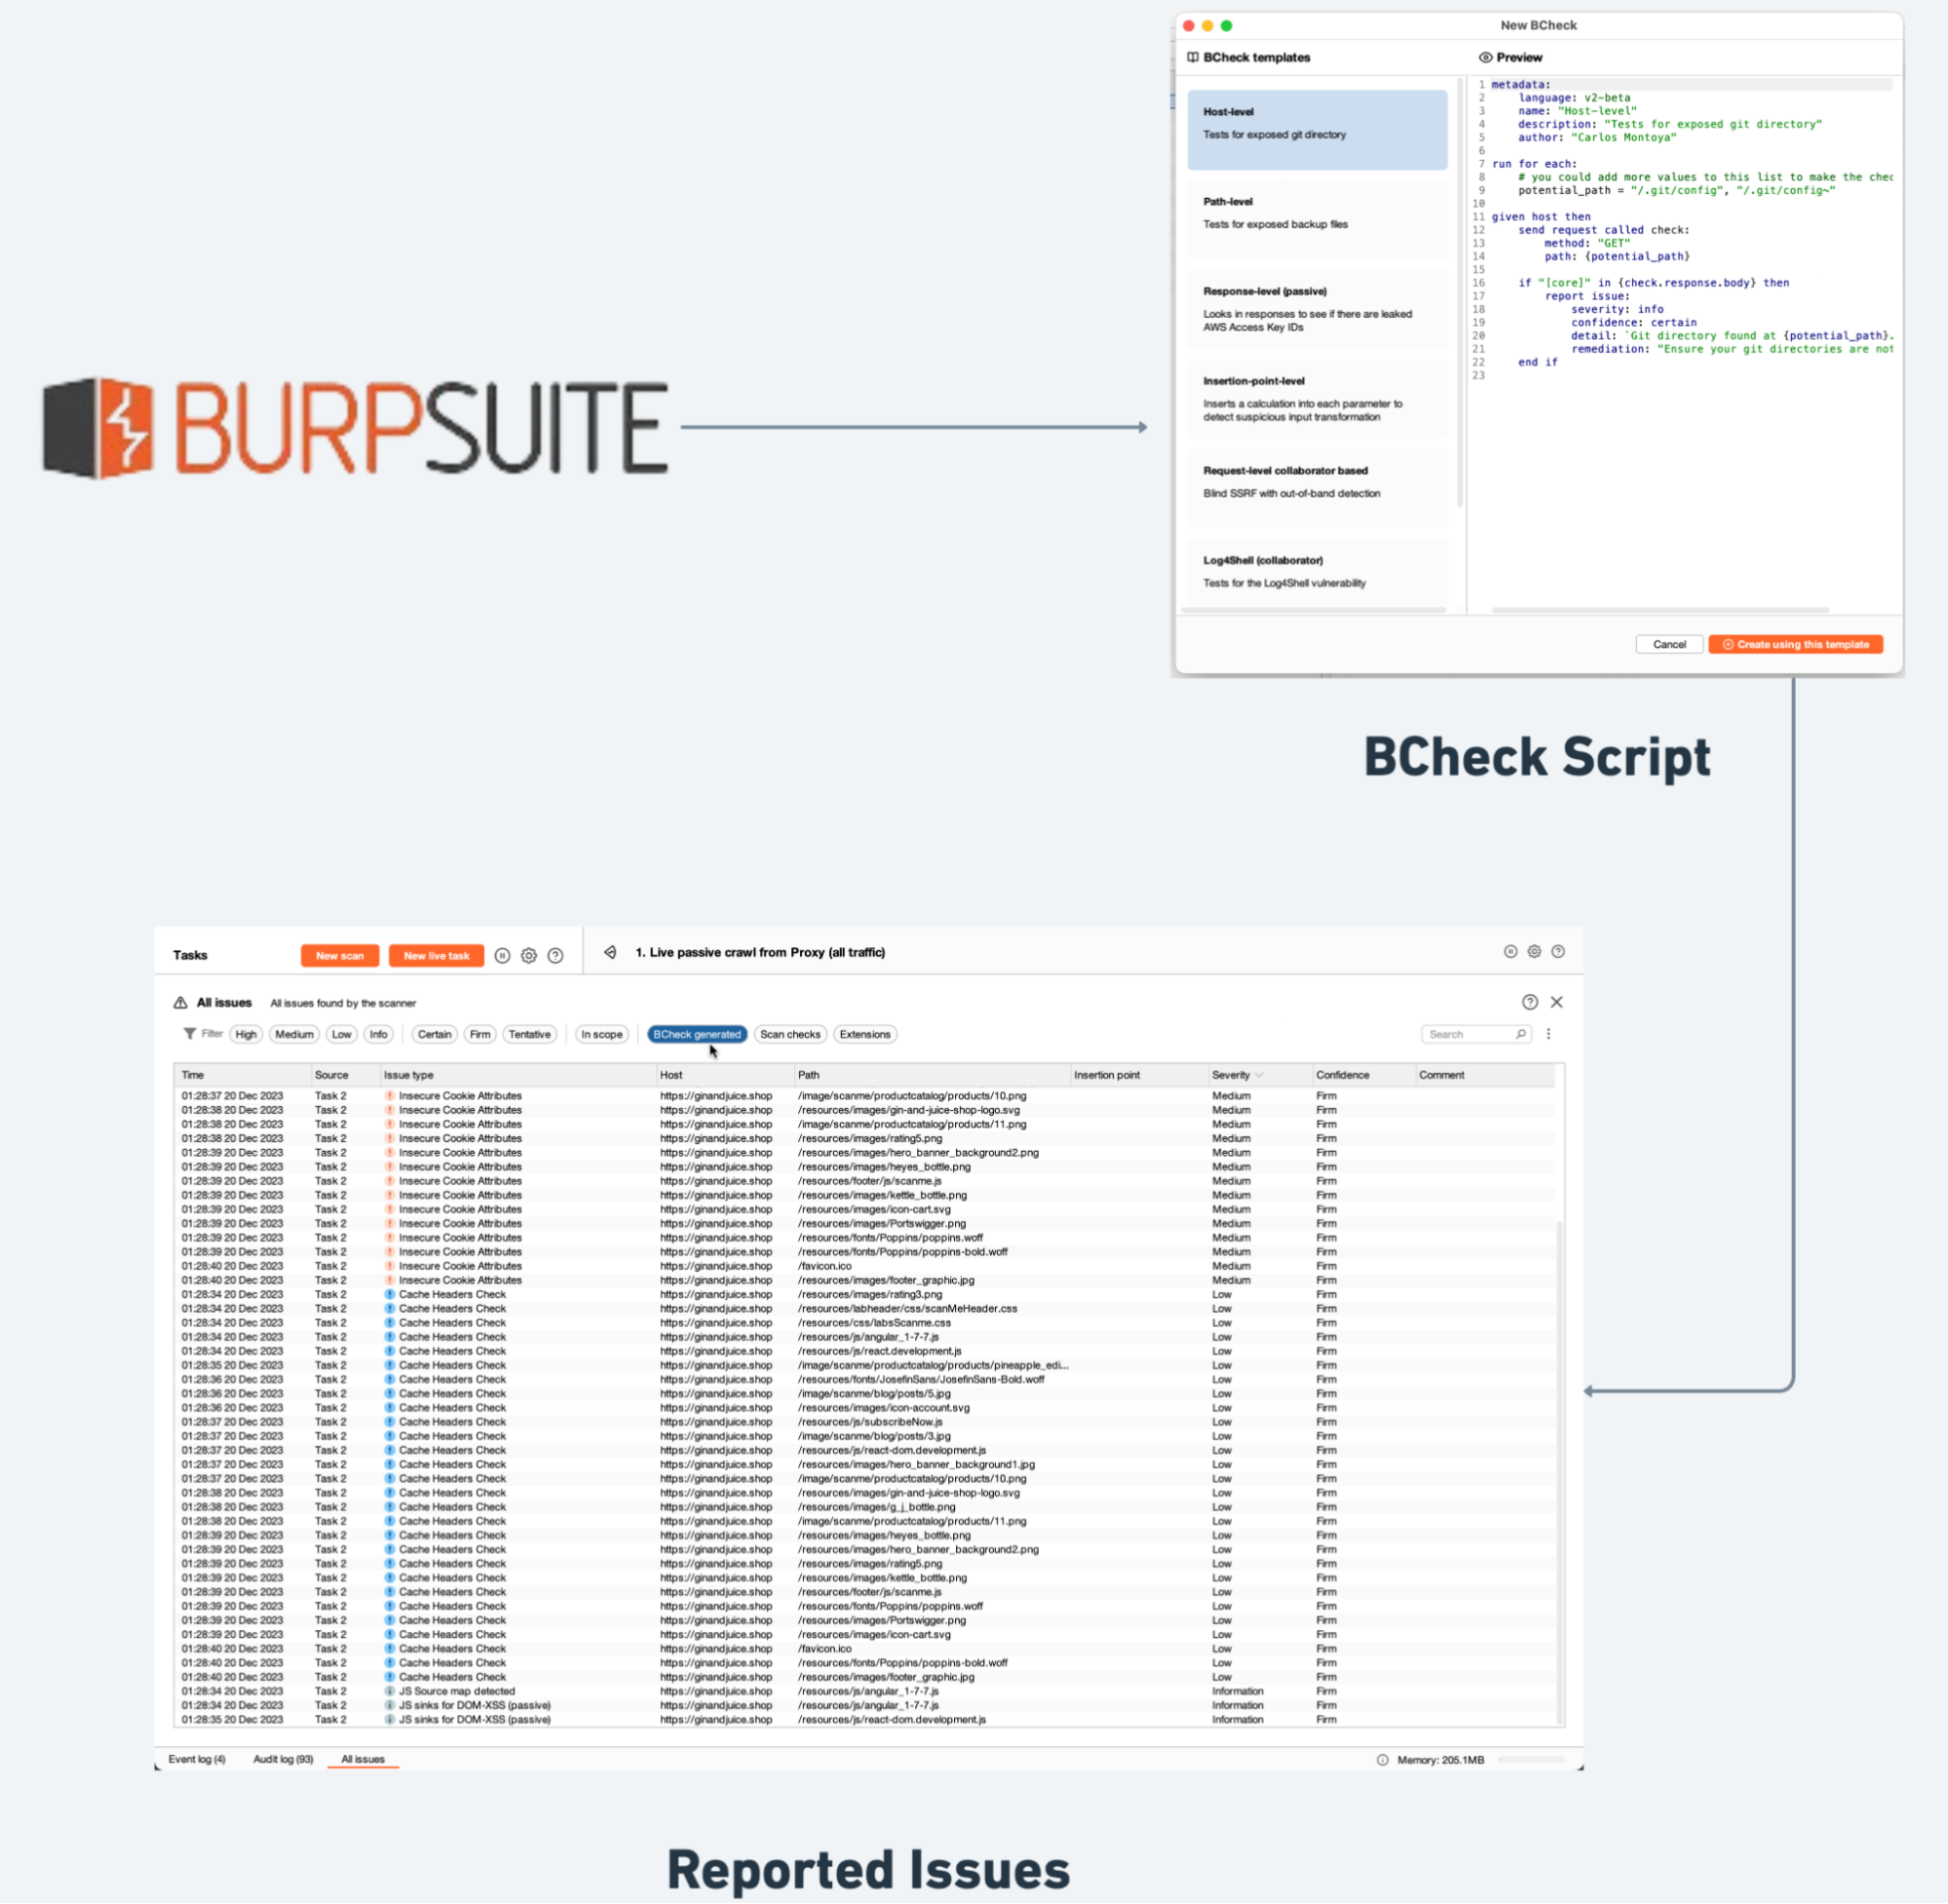 Burp suite bcheck-reported-issues